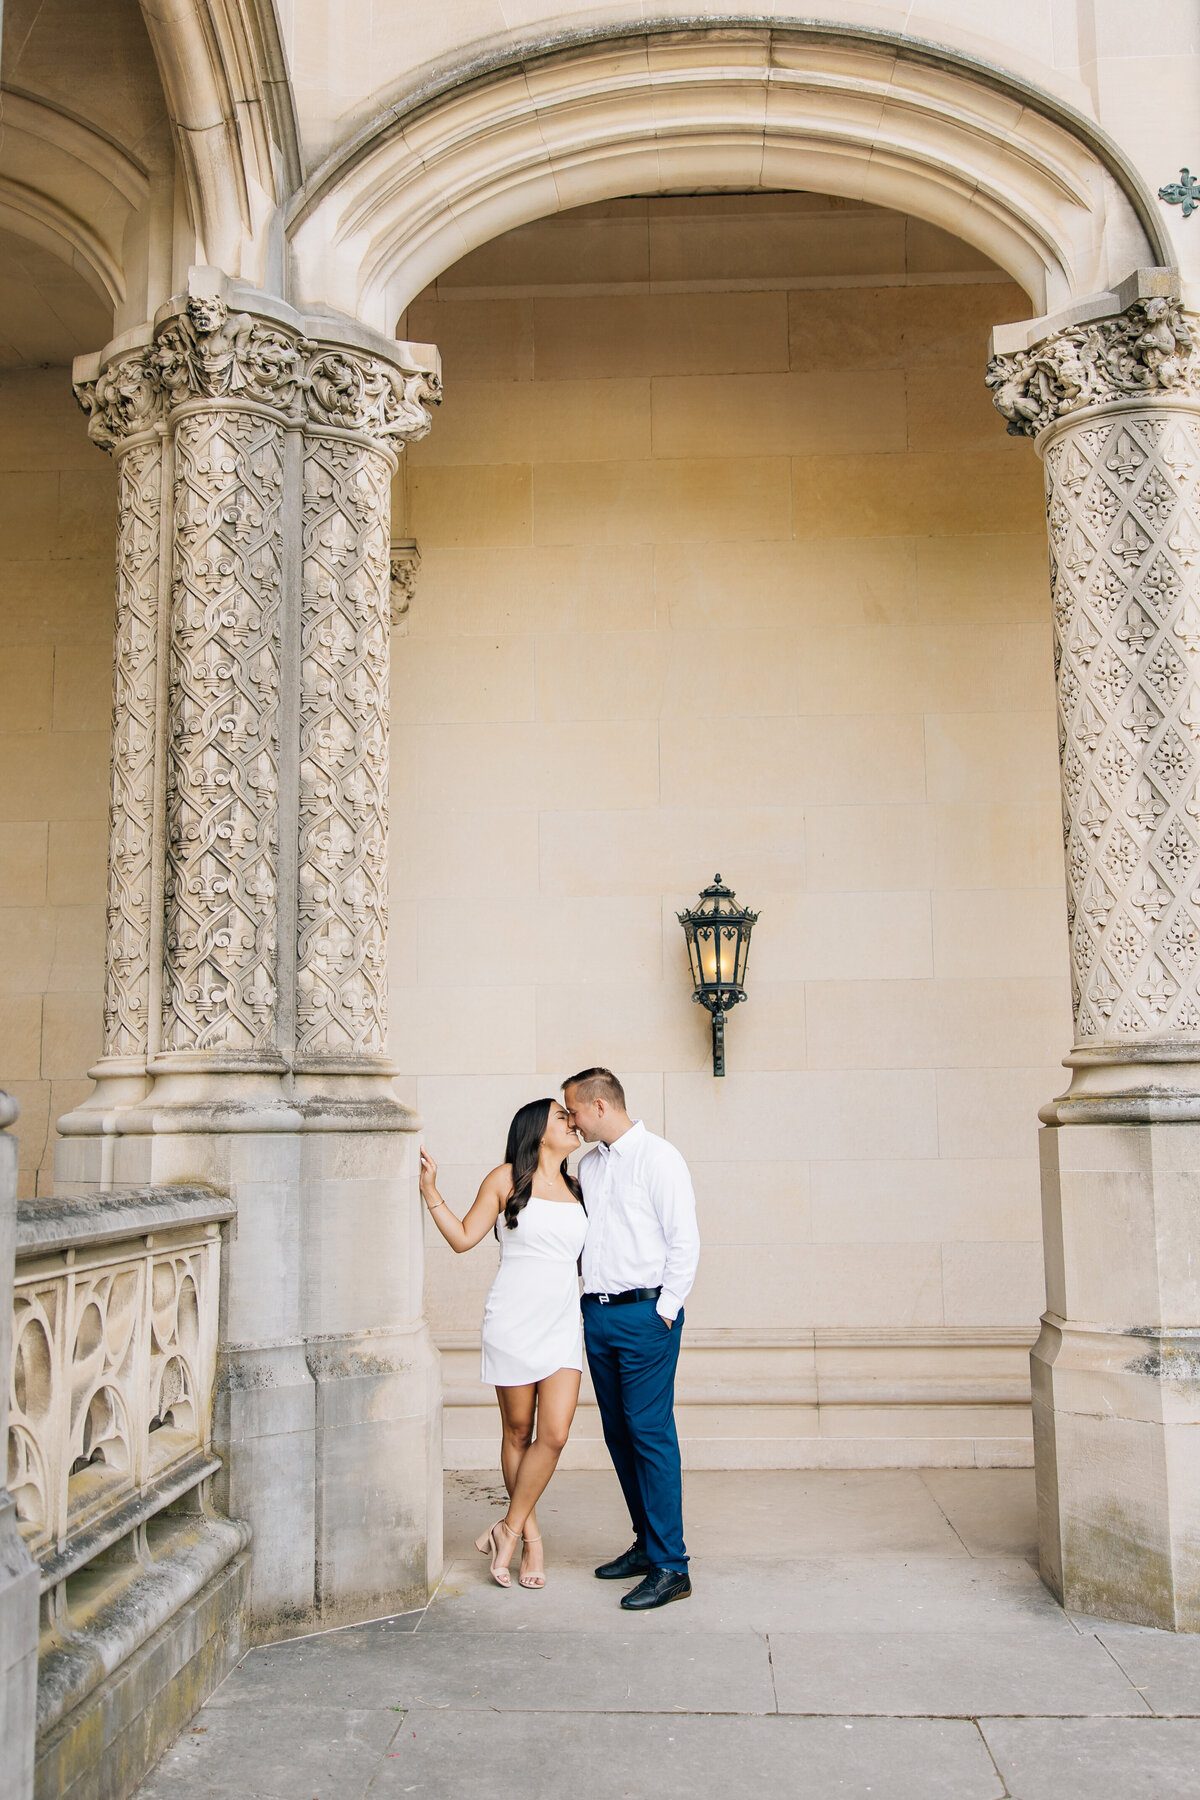 Jessica & Ryan Engagements at Biltmore Estate - Tracy Waldrop Photography-6